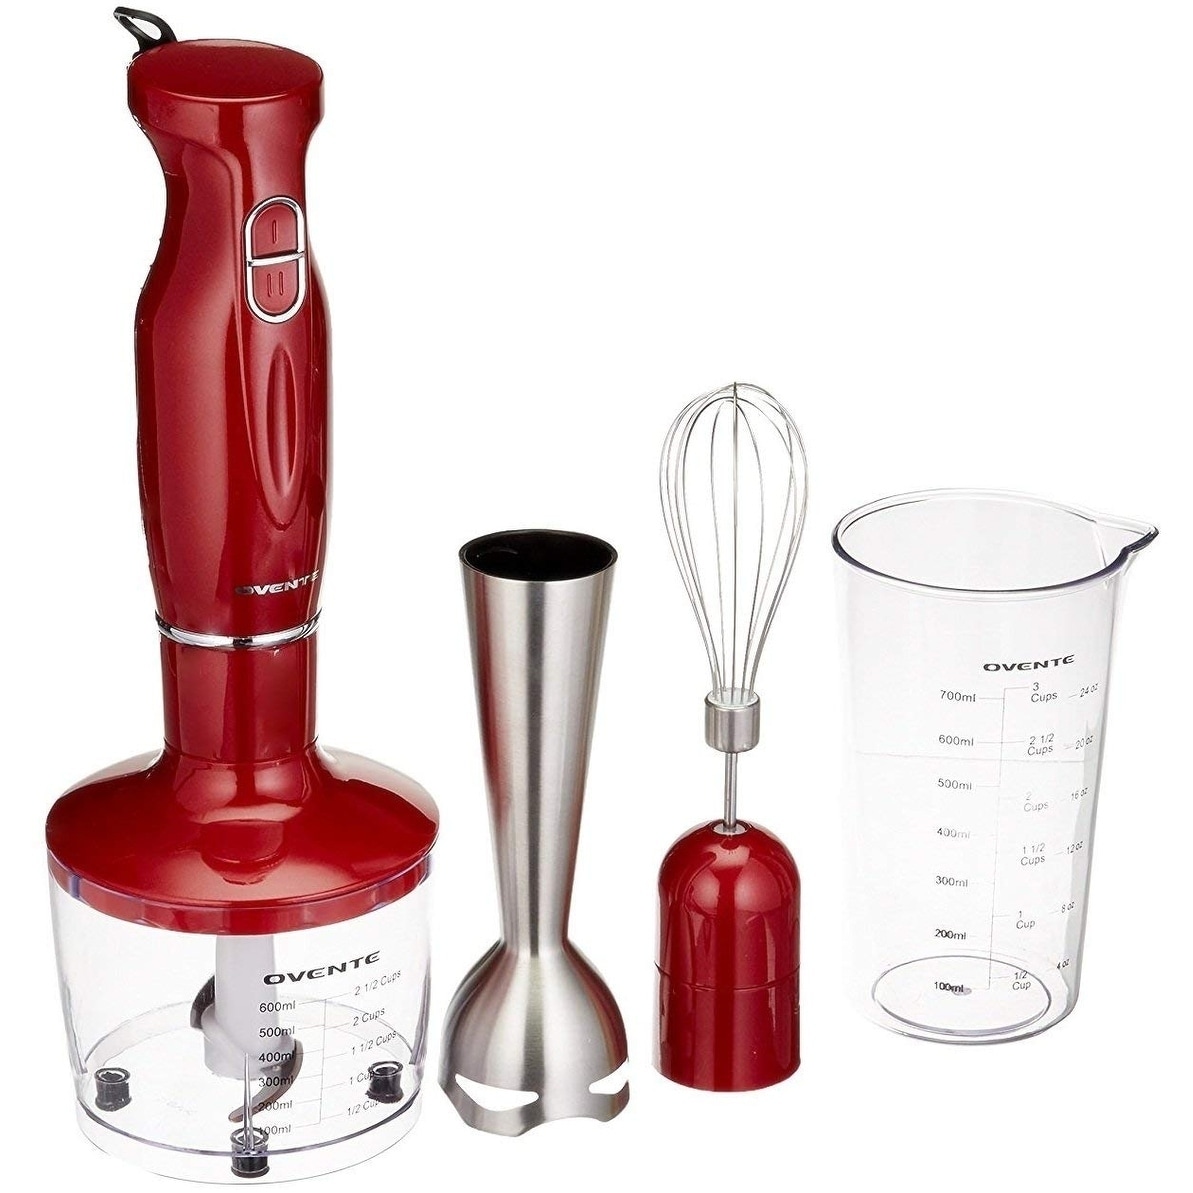 https://ak1.ostkcdn.com/images/products/23503692/Ovente-HS585-Multi-Purpose-Immersion-Hand-Blender-Set-300-Watts-8f154955-5ccc-4be8-bc39-c8f23a45fce5.jpg